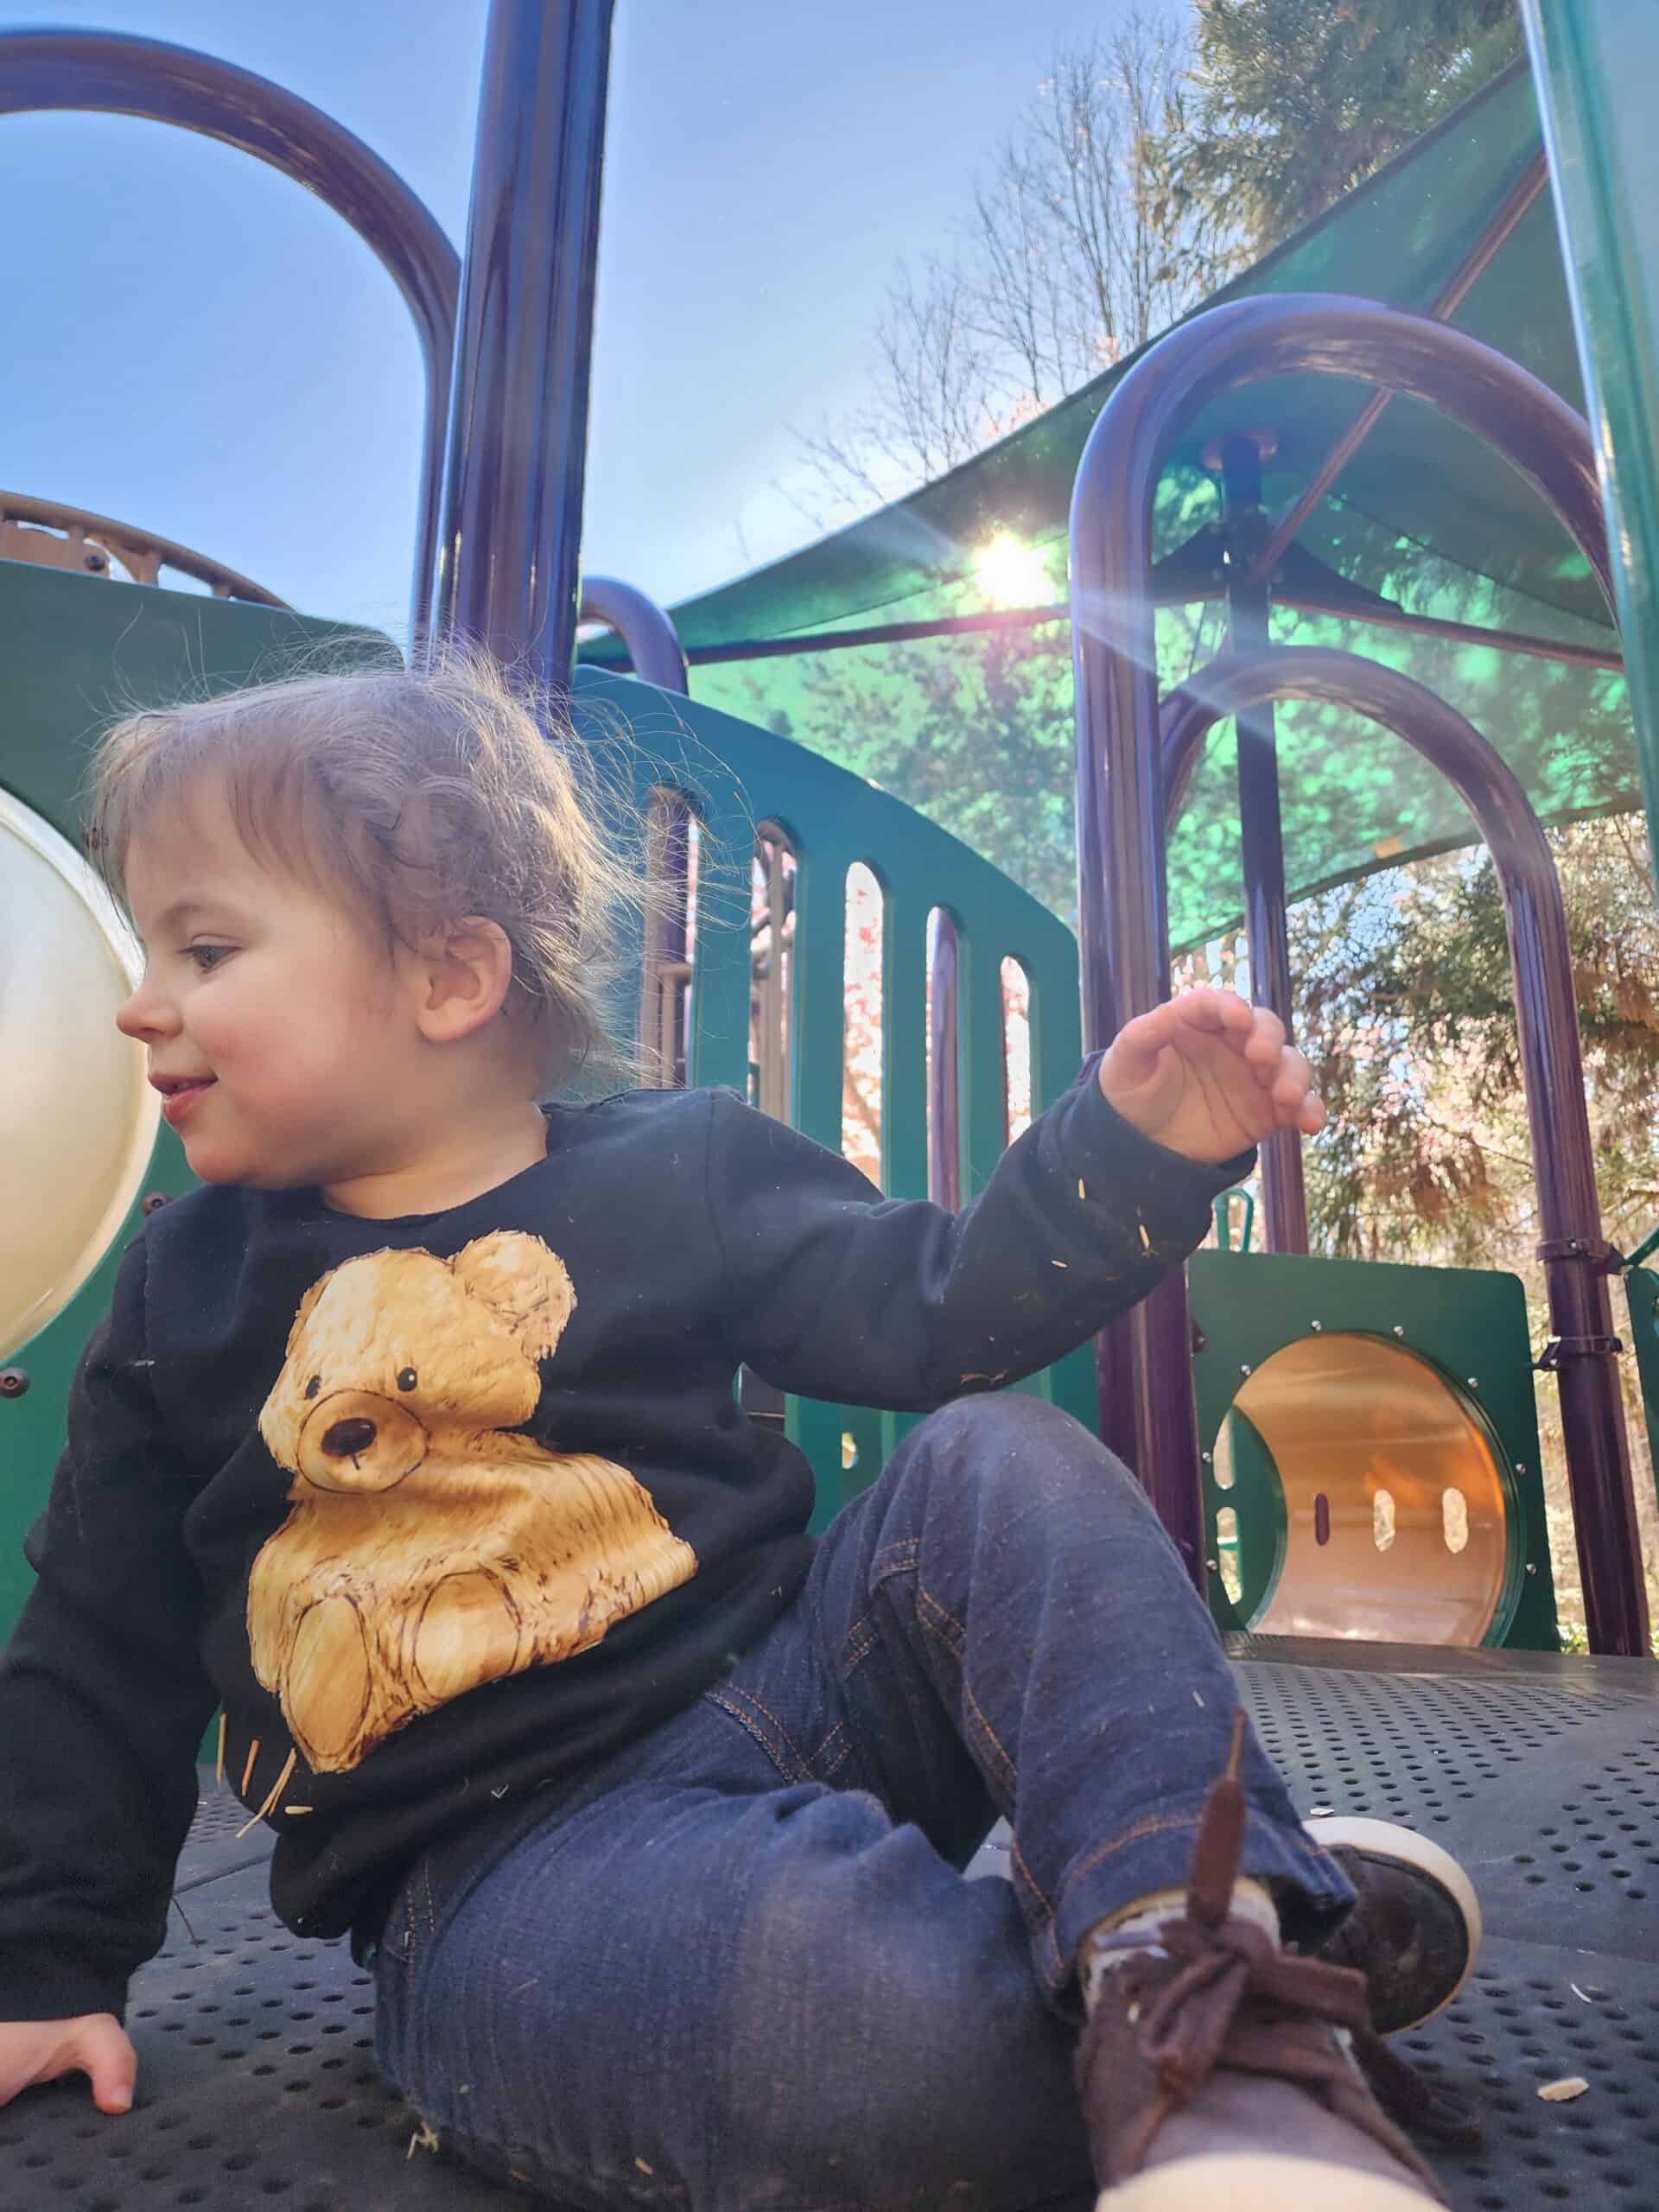 A young child with a joyful expression sits on a playground in Cary, North Carolina, with rays of sunlight filtering through the equipment. The child wears a black sweater adorned with a teddy bear graphic and blue jeans, capturing a moment of innocent playtime.